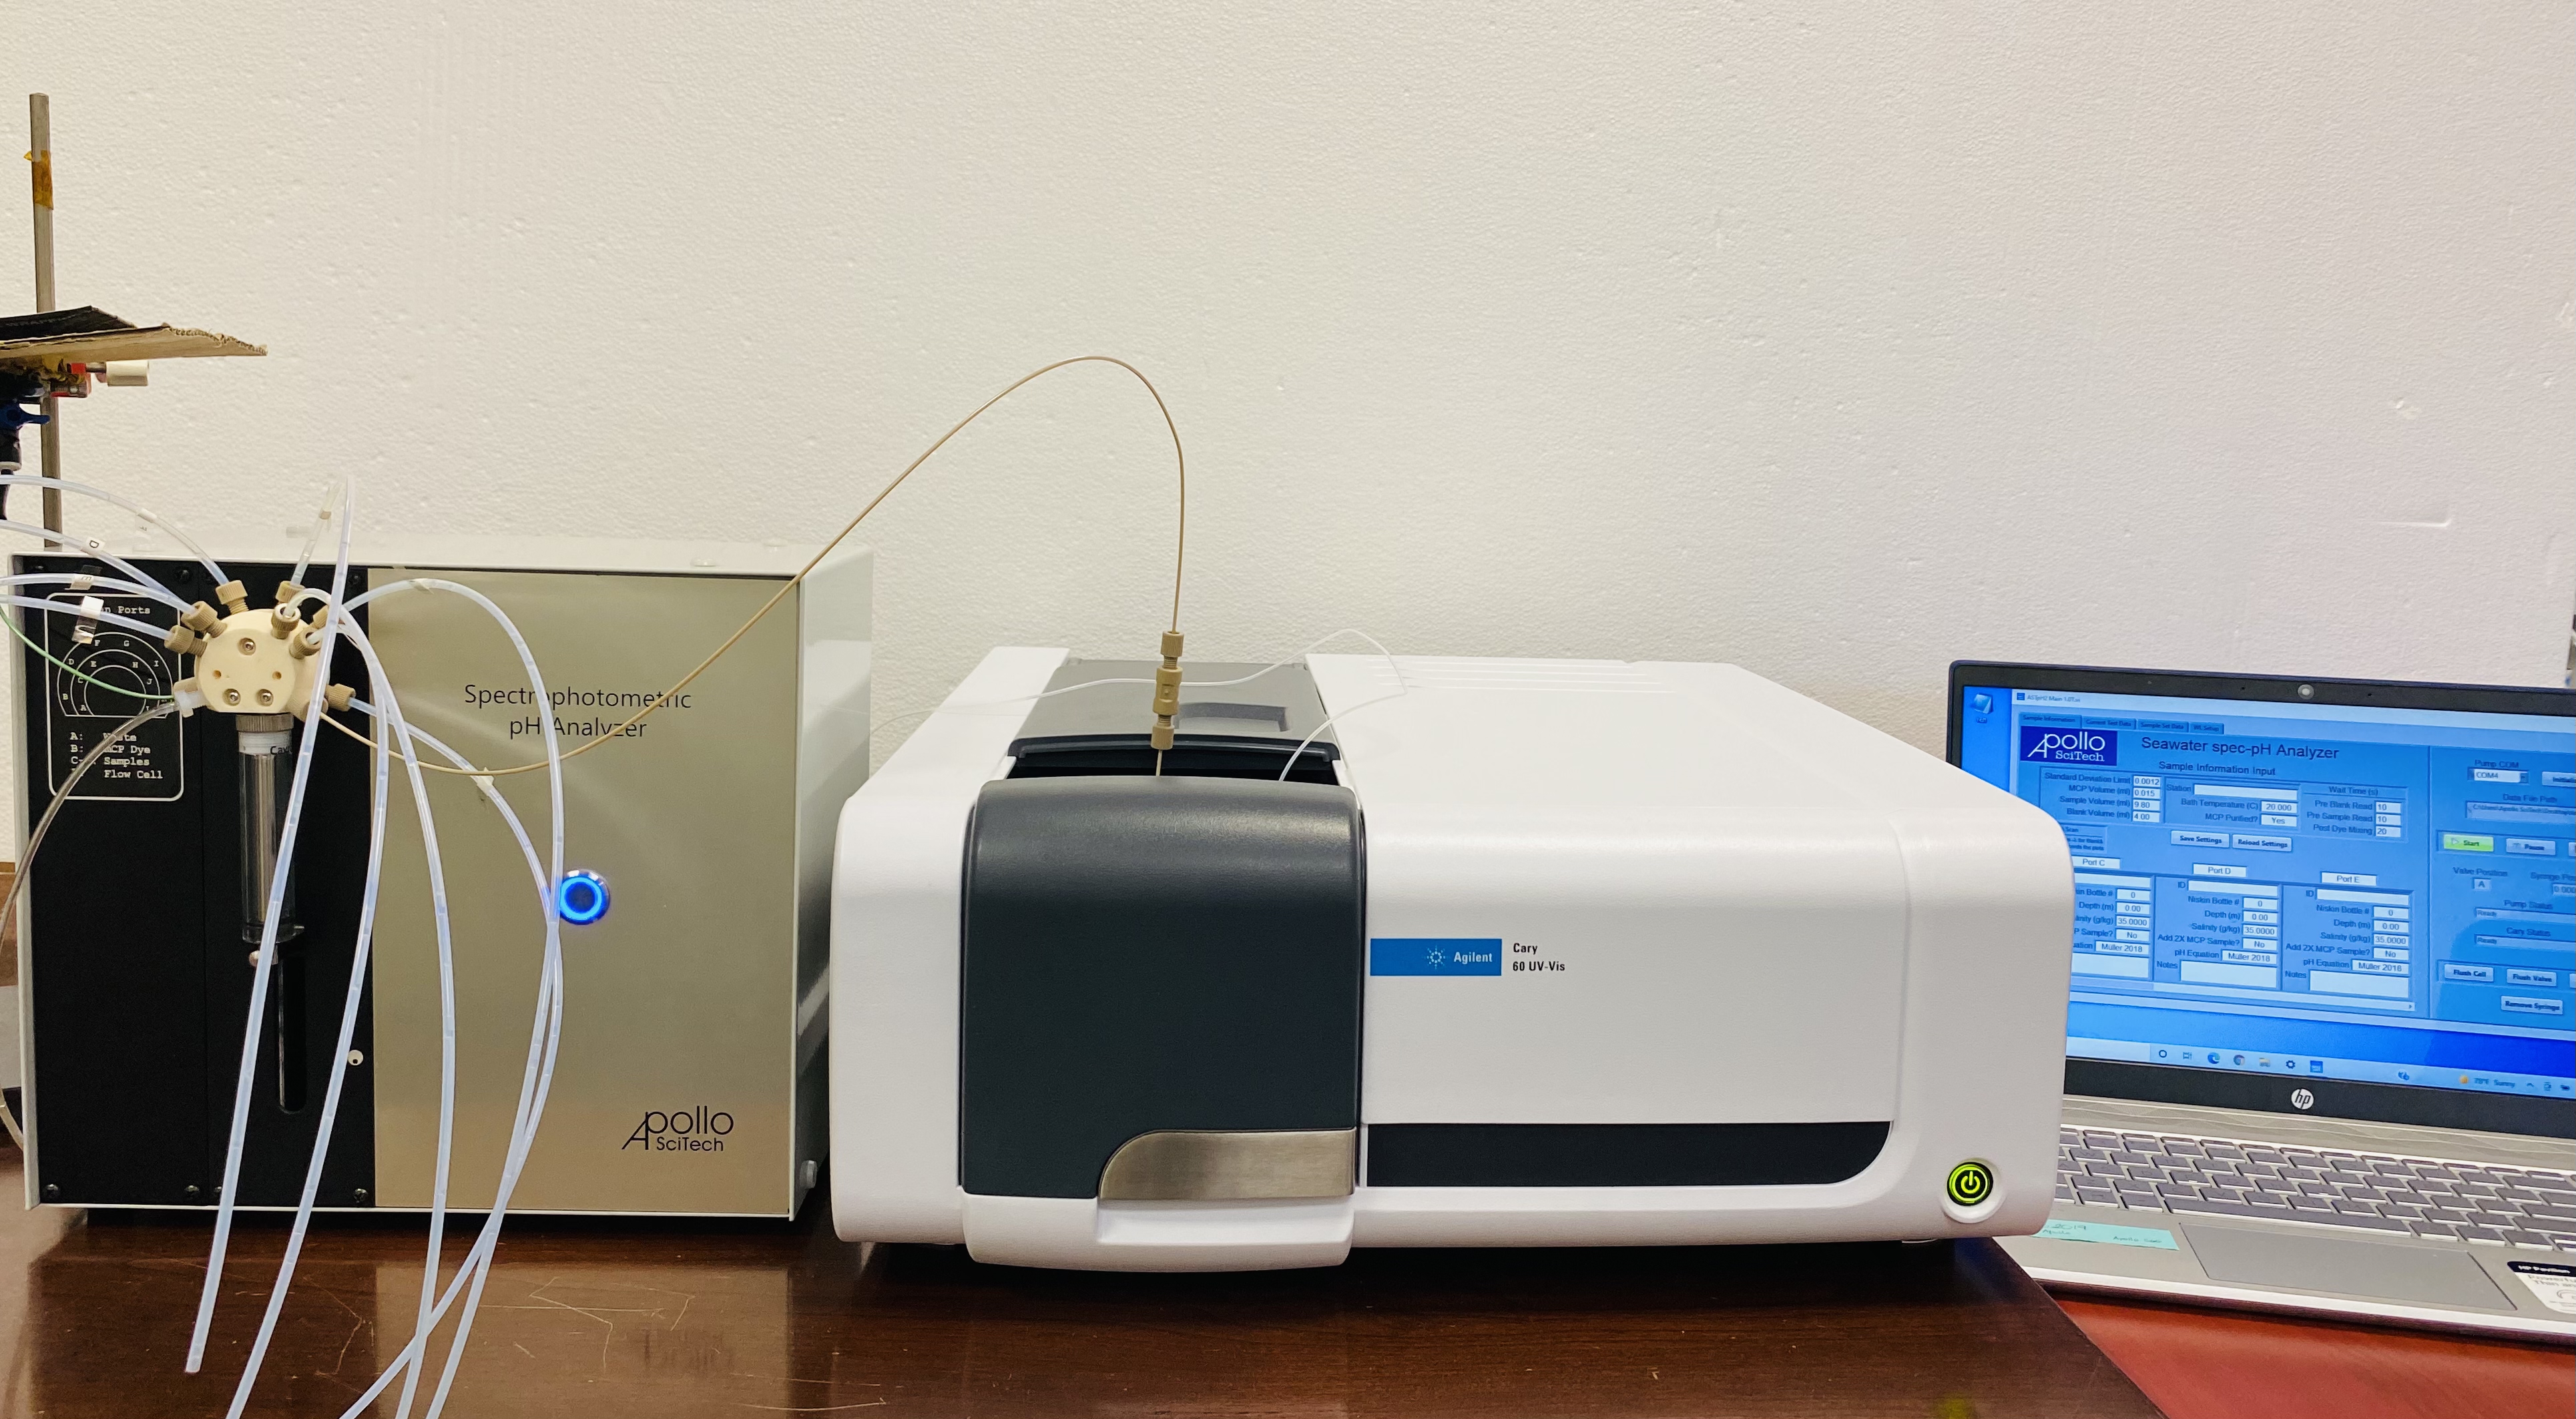 Spectrophotometric Seawater pH Analyzer measuring samples in a lab